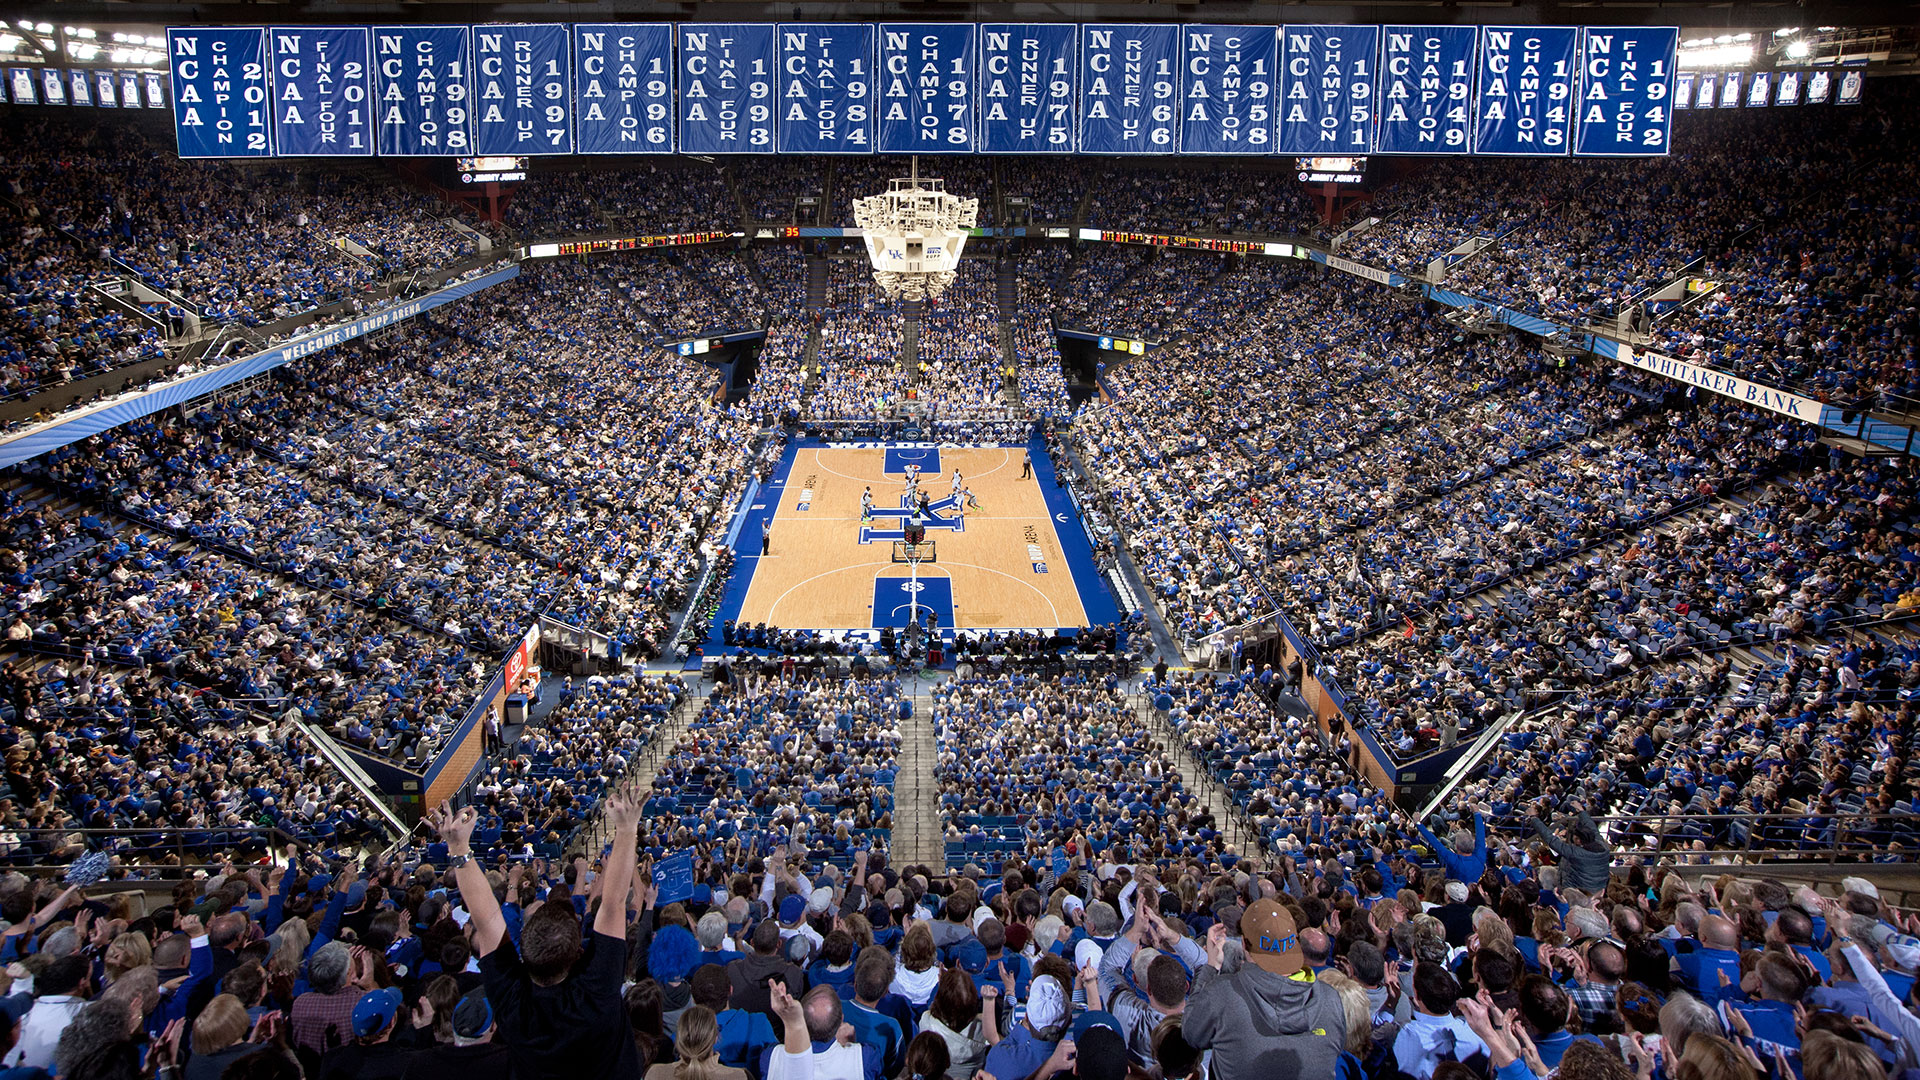 Rupp Arena Banners